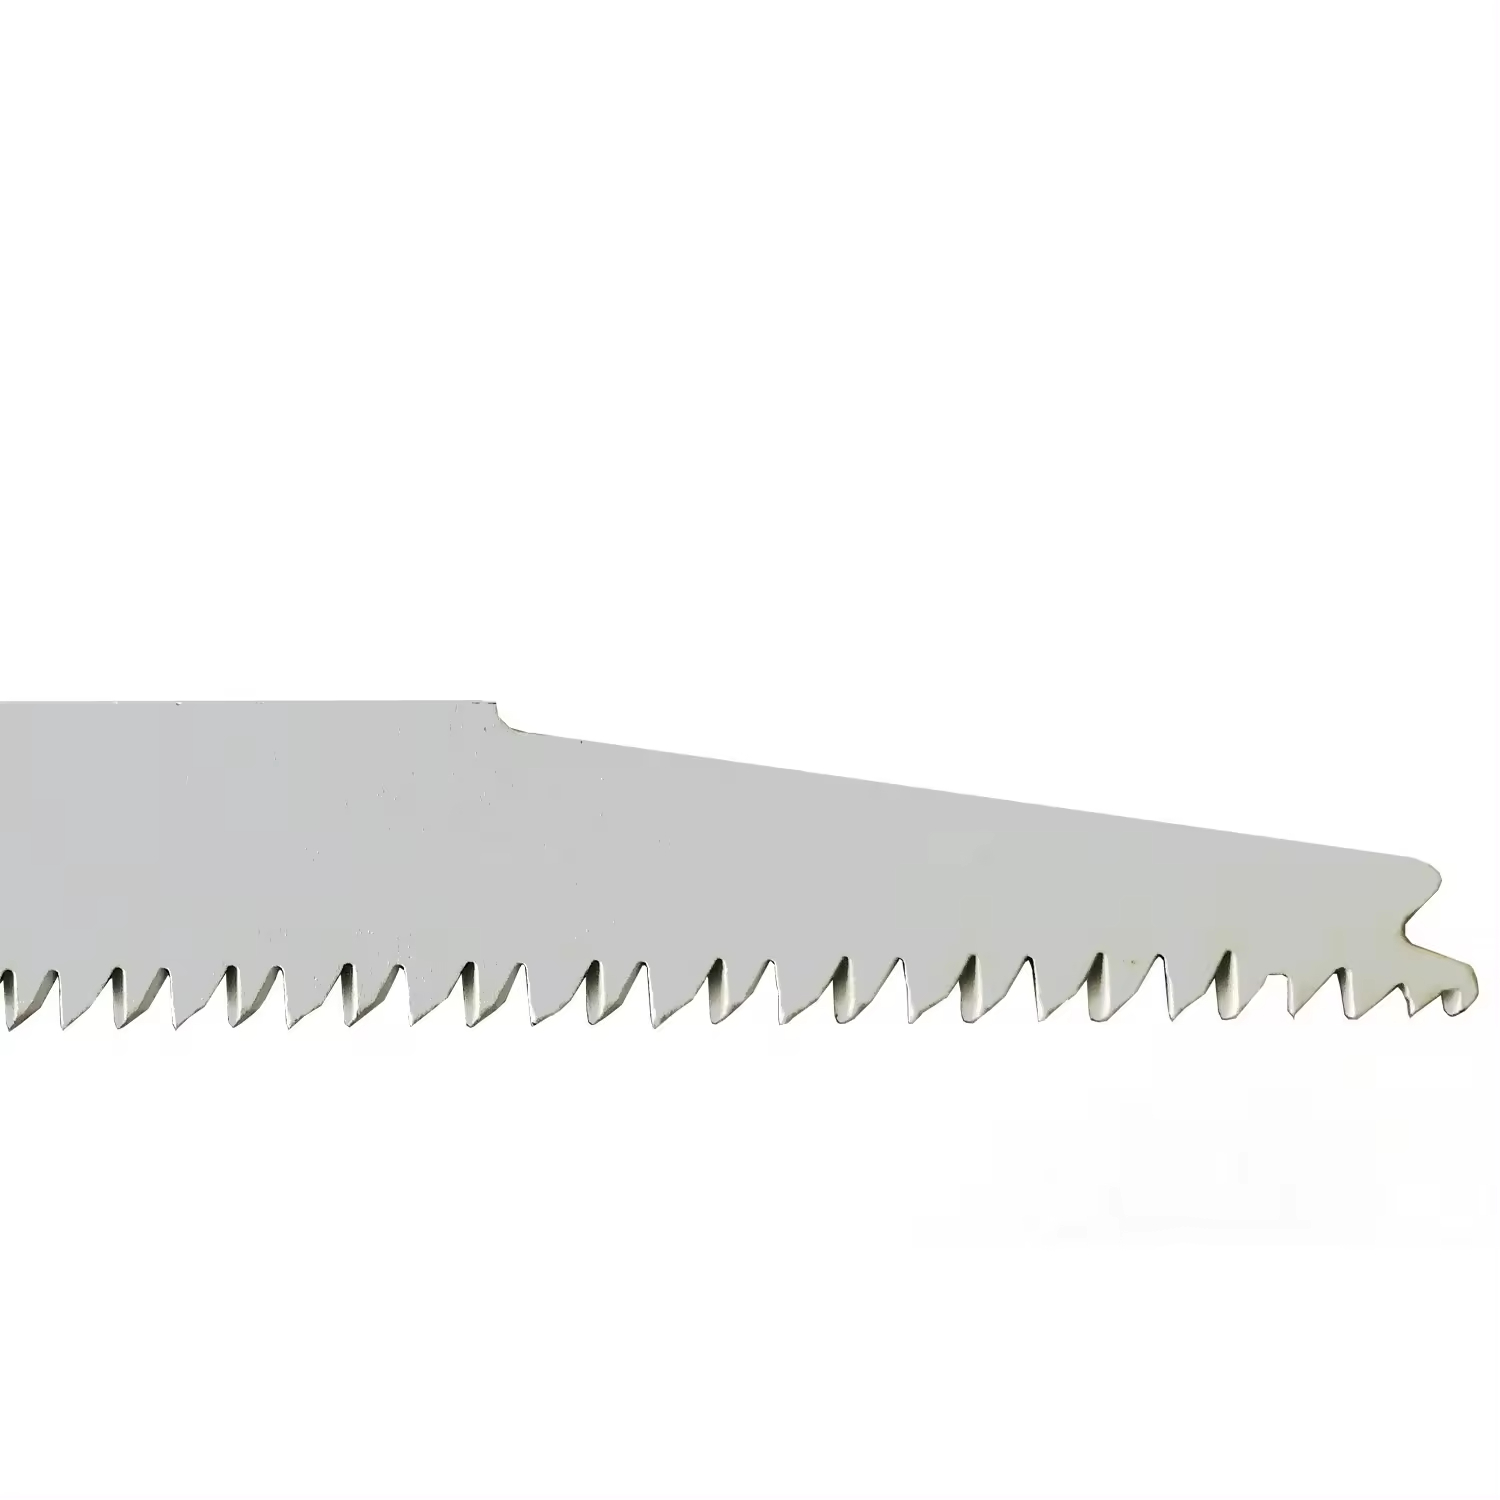 Hantechn@ Customer Hot Sell Hcs Reciprocating Saw Blades For Coarse Wood Tree Cutting And Pruning